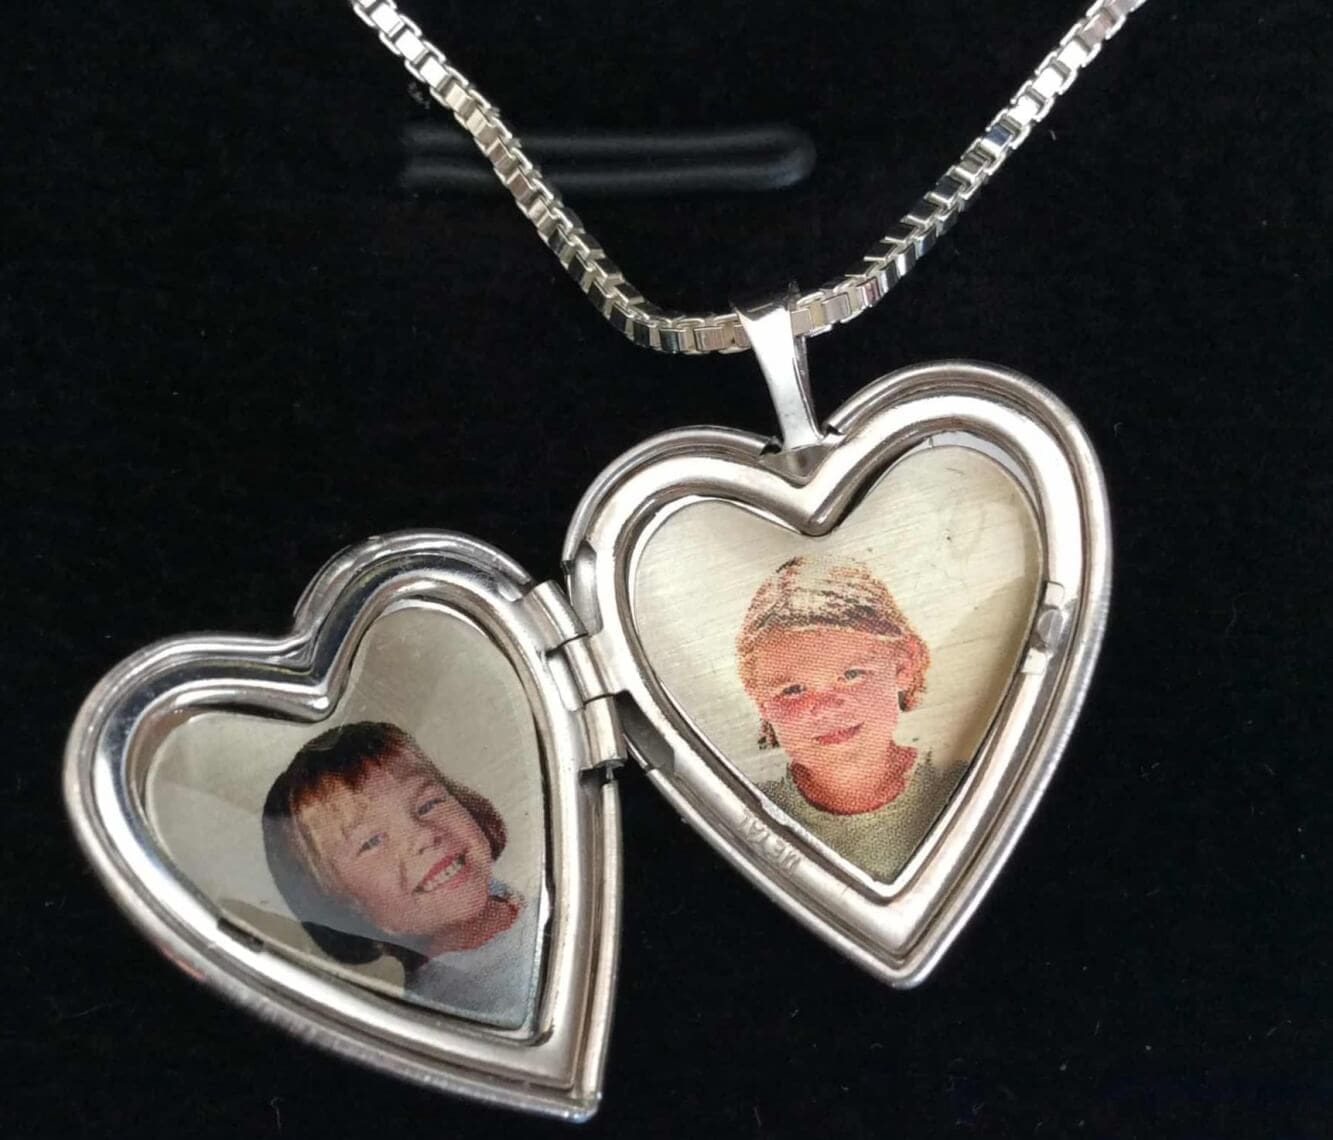 Locket with little girl picturees